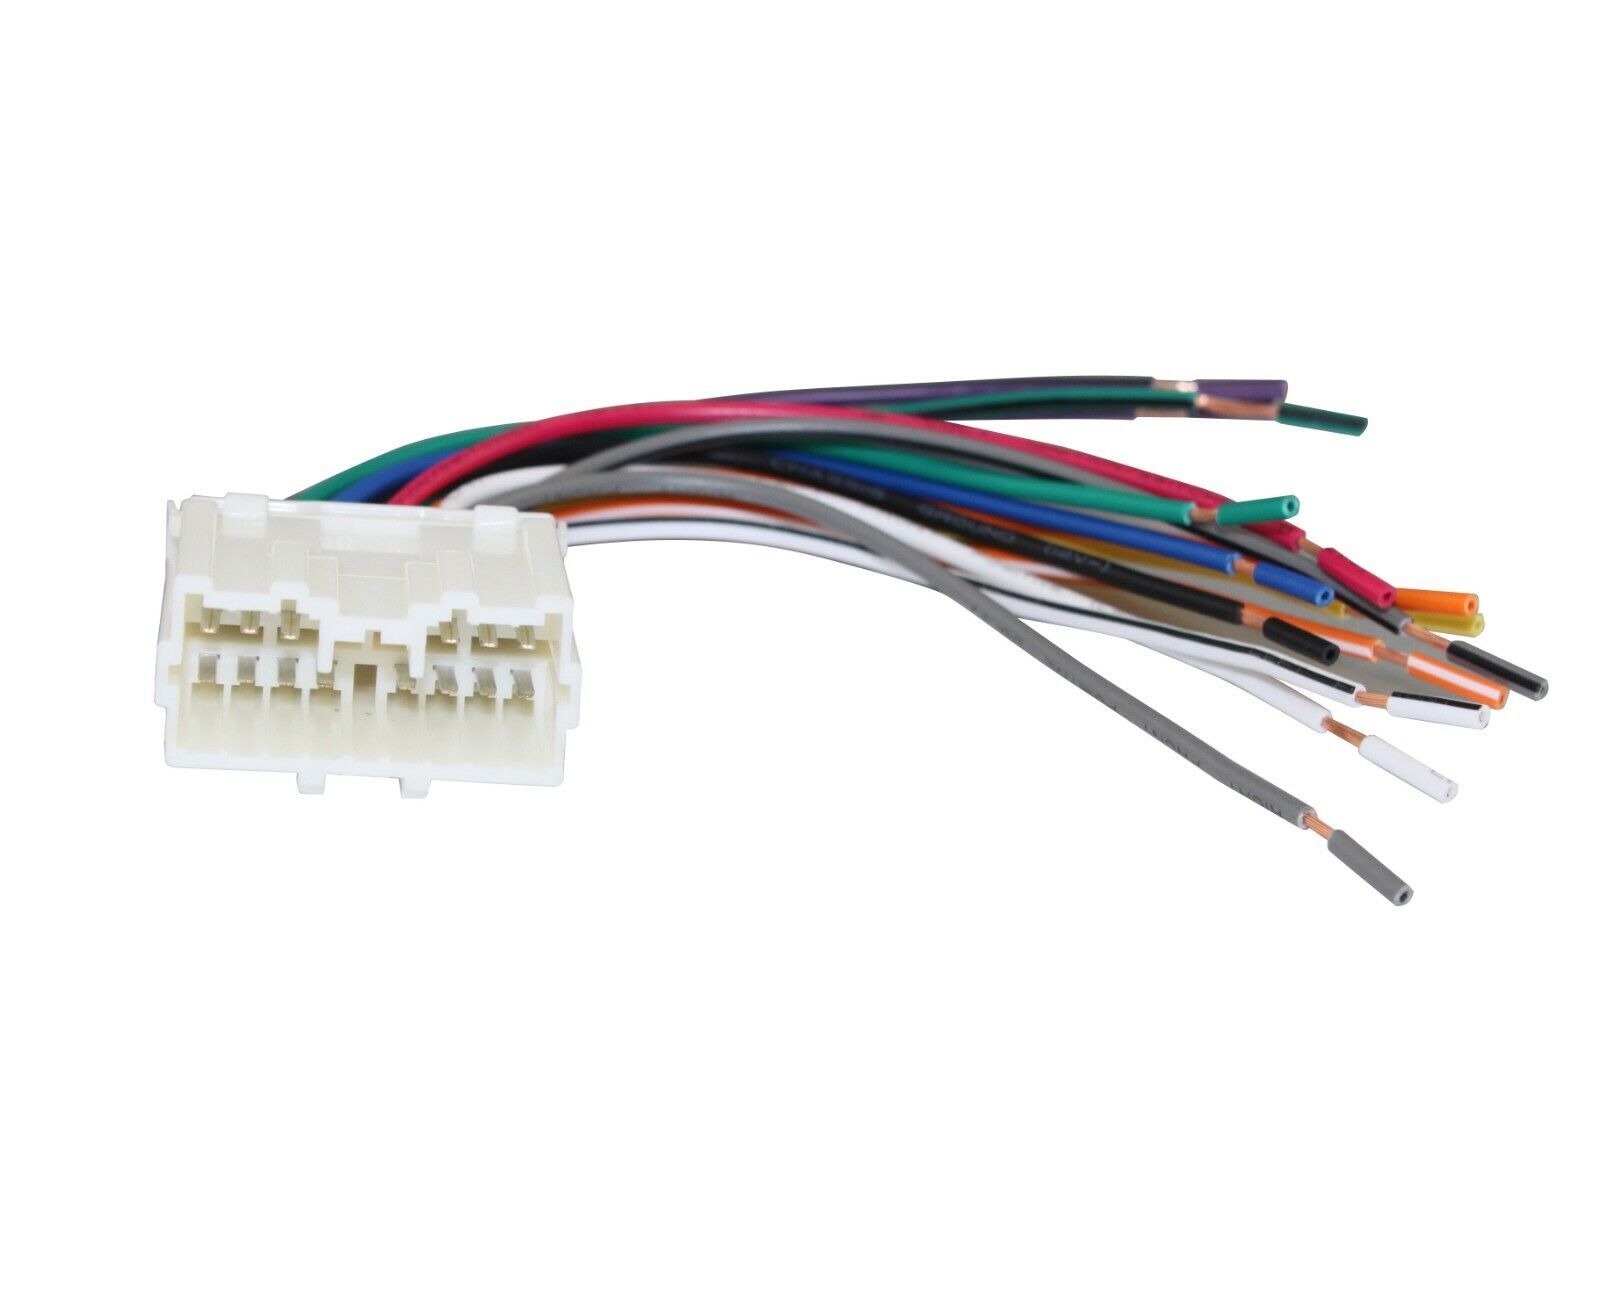 Primary image for A4A Wiring Harness For Mitsubishi Lancer Pajero Shogun Adaptor